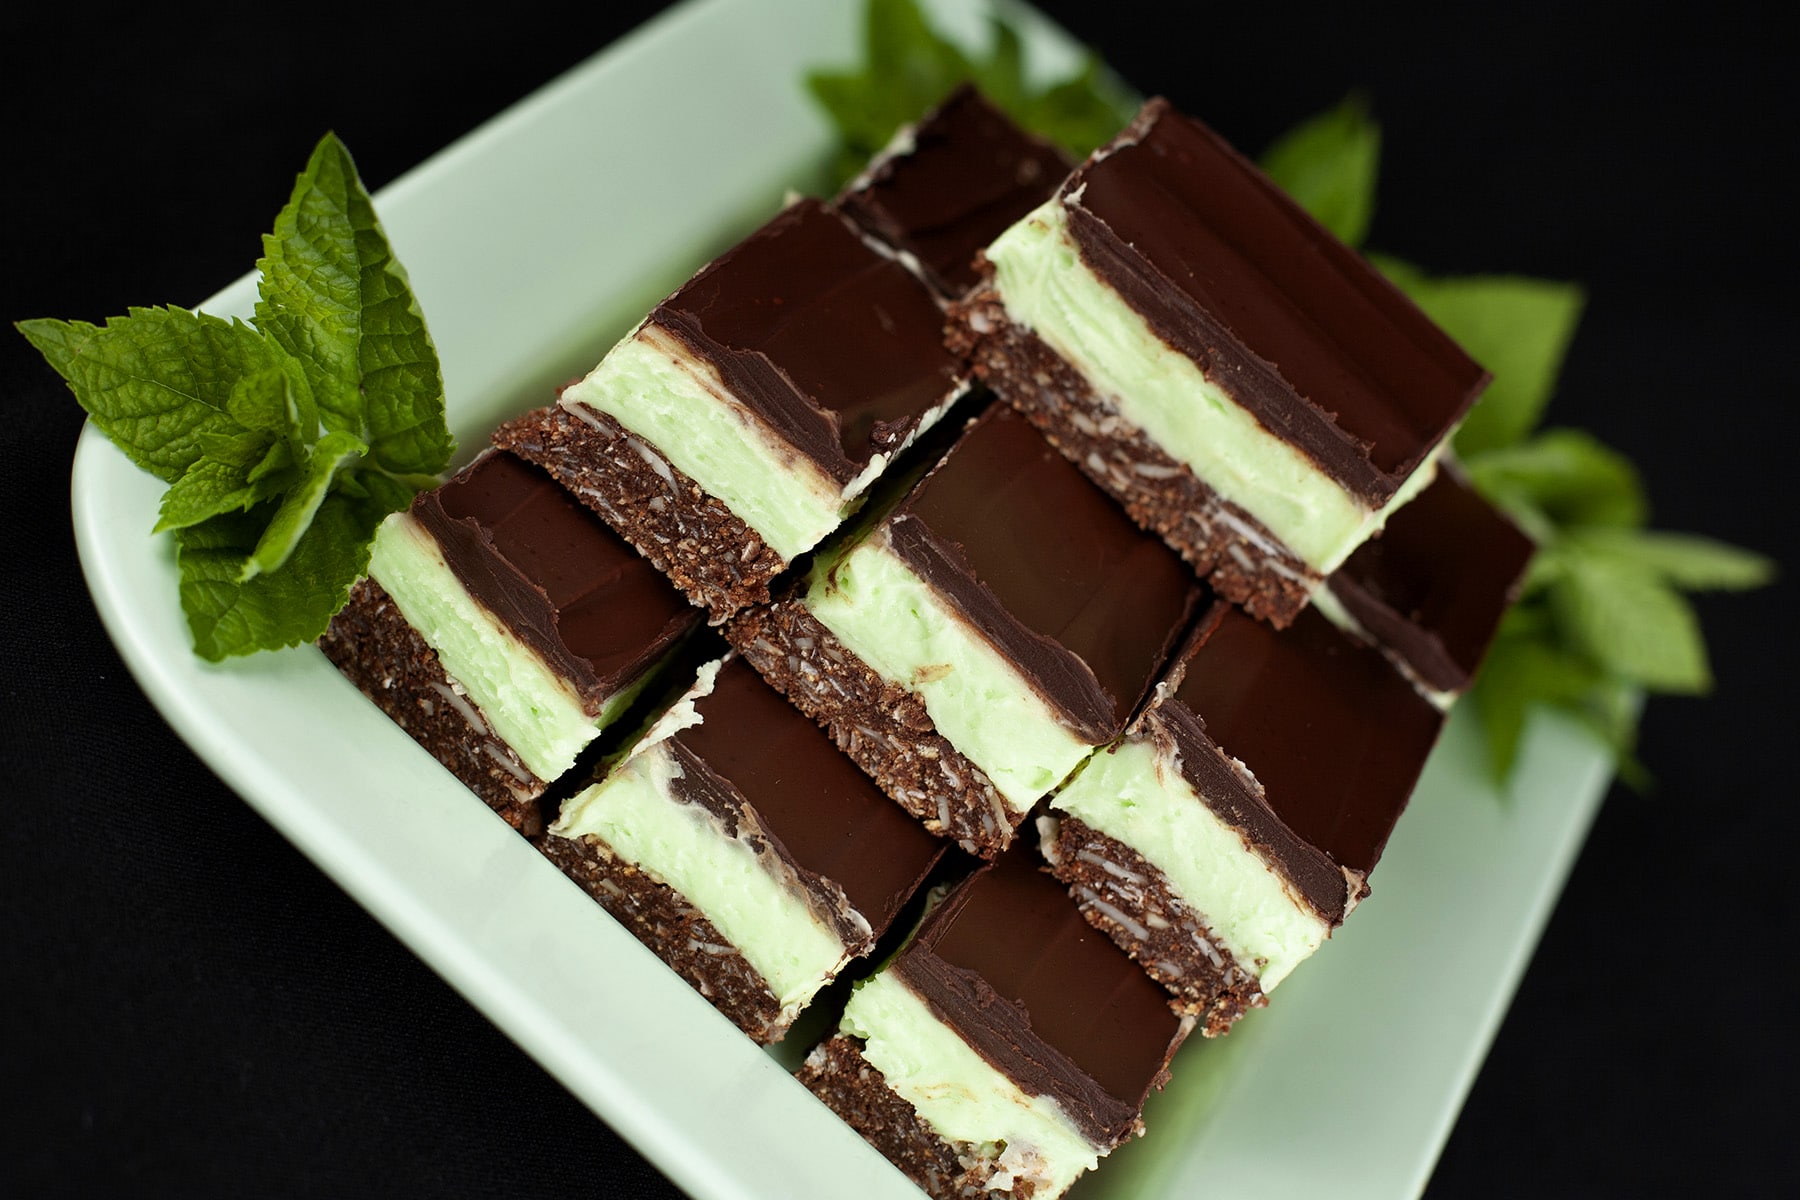 A plate of Creme de Menthe Nanaimo Bars - a 3 layered bar. The top and bottom layers are chocolate, and the middle layer is a green buttercream. They are on a green plate, garnished with a sprig of fresh mint.